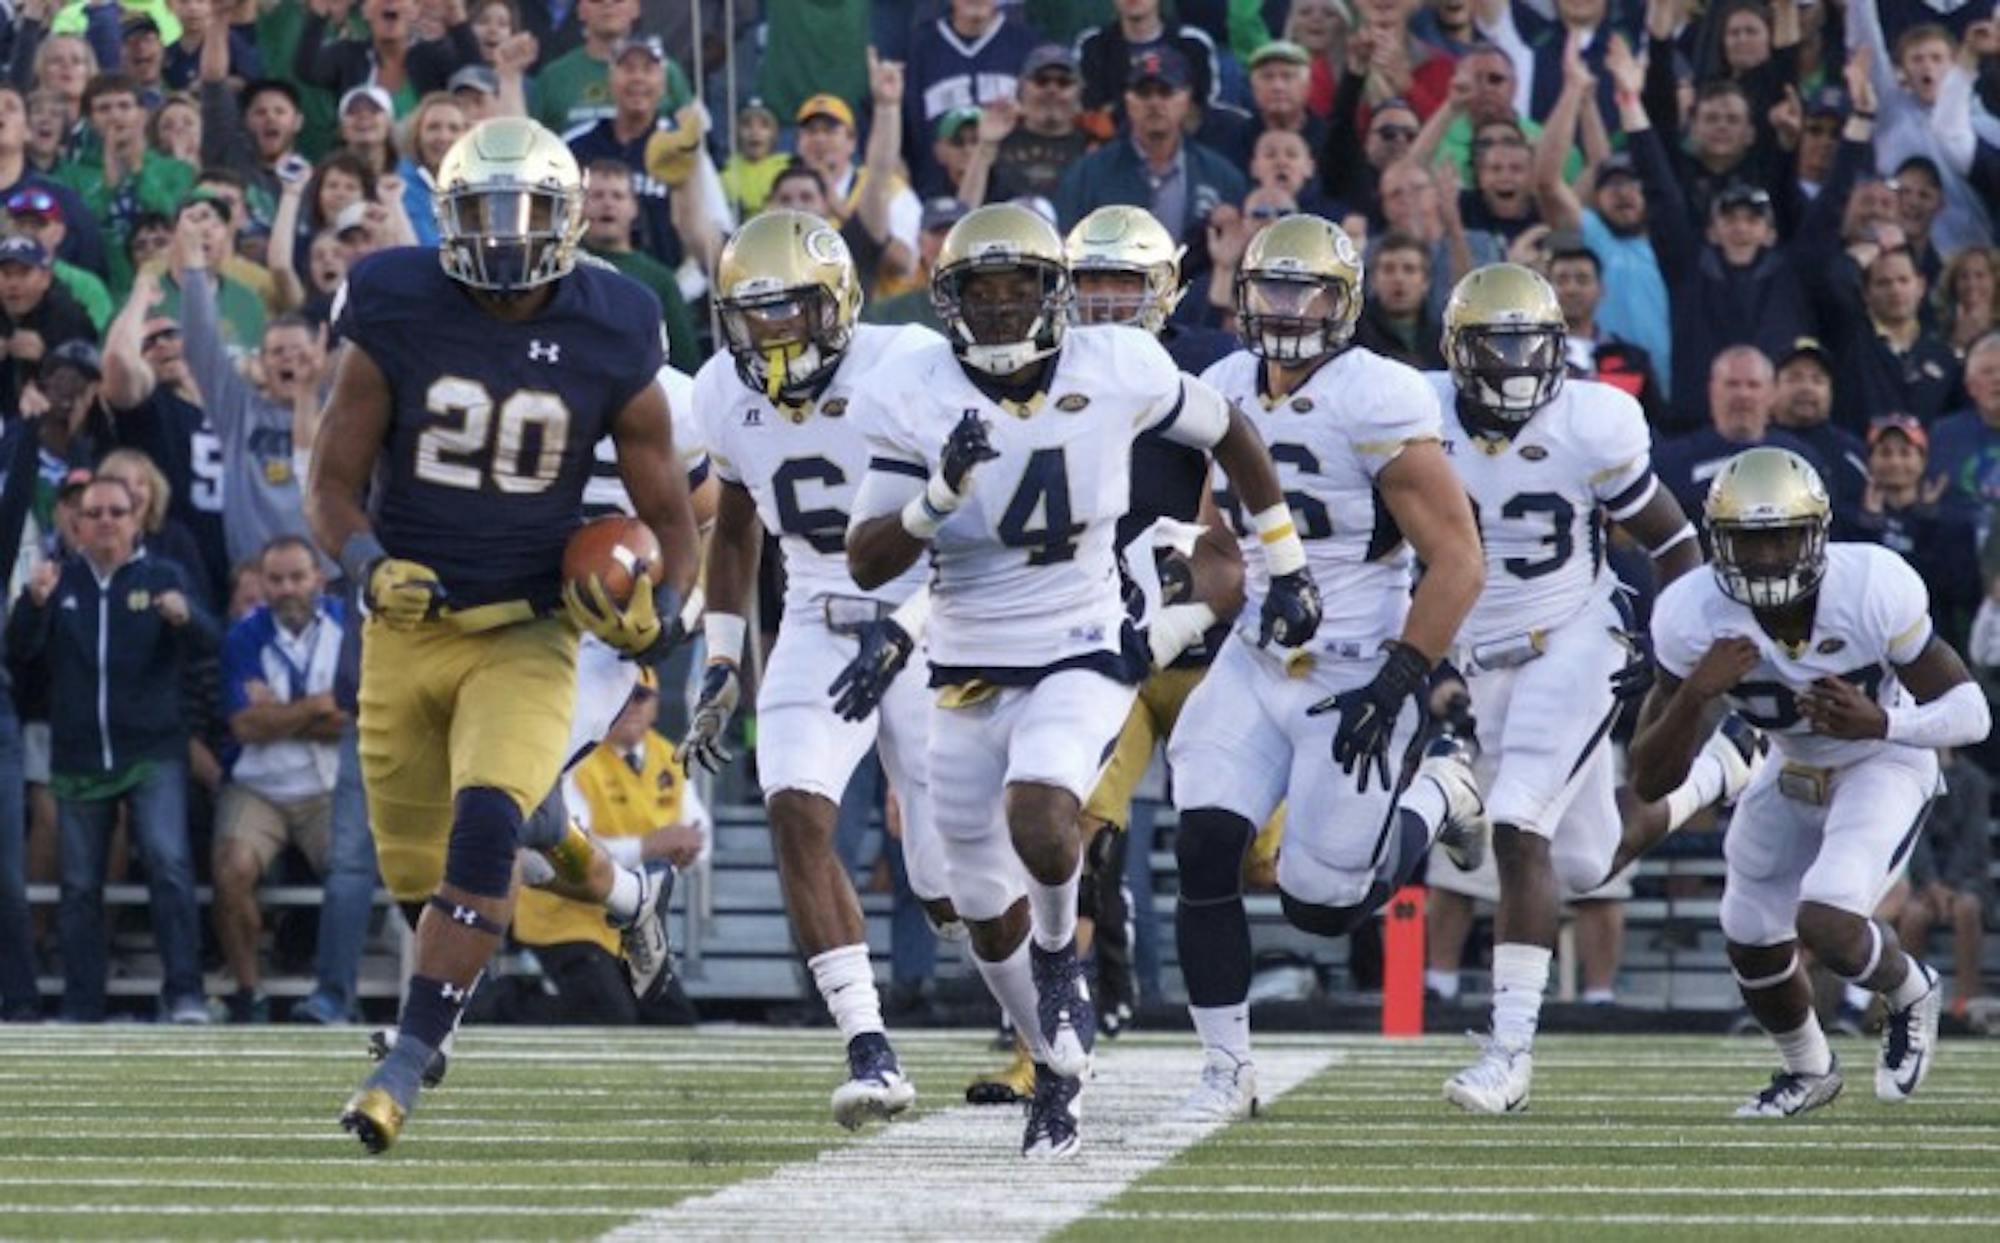 Irish senior running back C.J. Prosise leaves the Georgia Tech defense in his wake during his 91-yard, fourth-quarter touchdown run in Notre Dame’s 30-22 win Saturday. The touchdown run, Prosise’s third of the game, was the longest in Notre Dame Stadium history, and pushed him over 200 multipurpose yards for the contest.